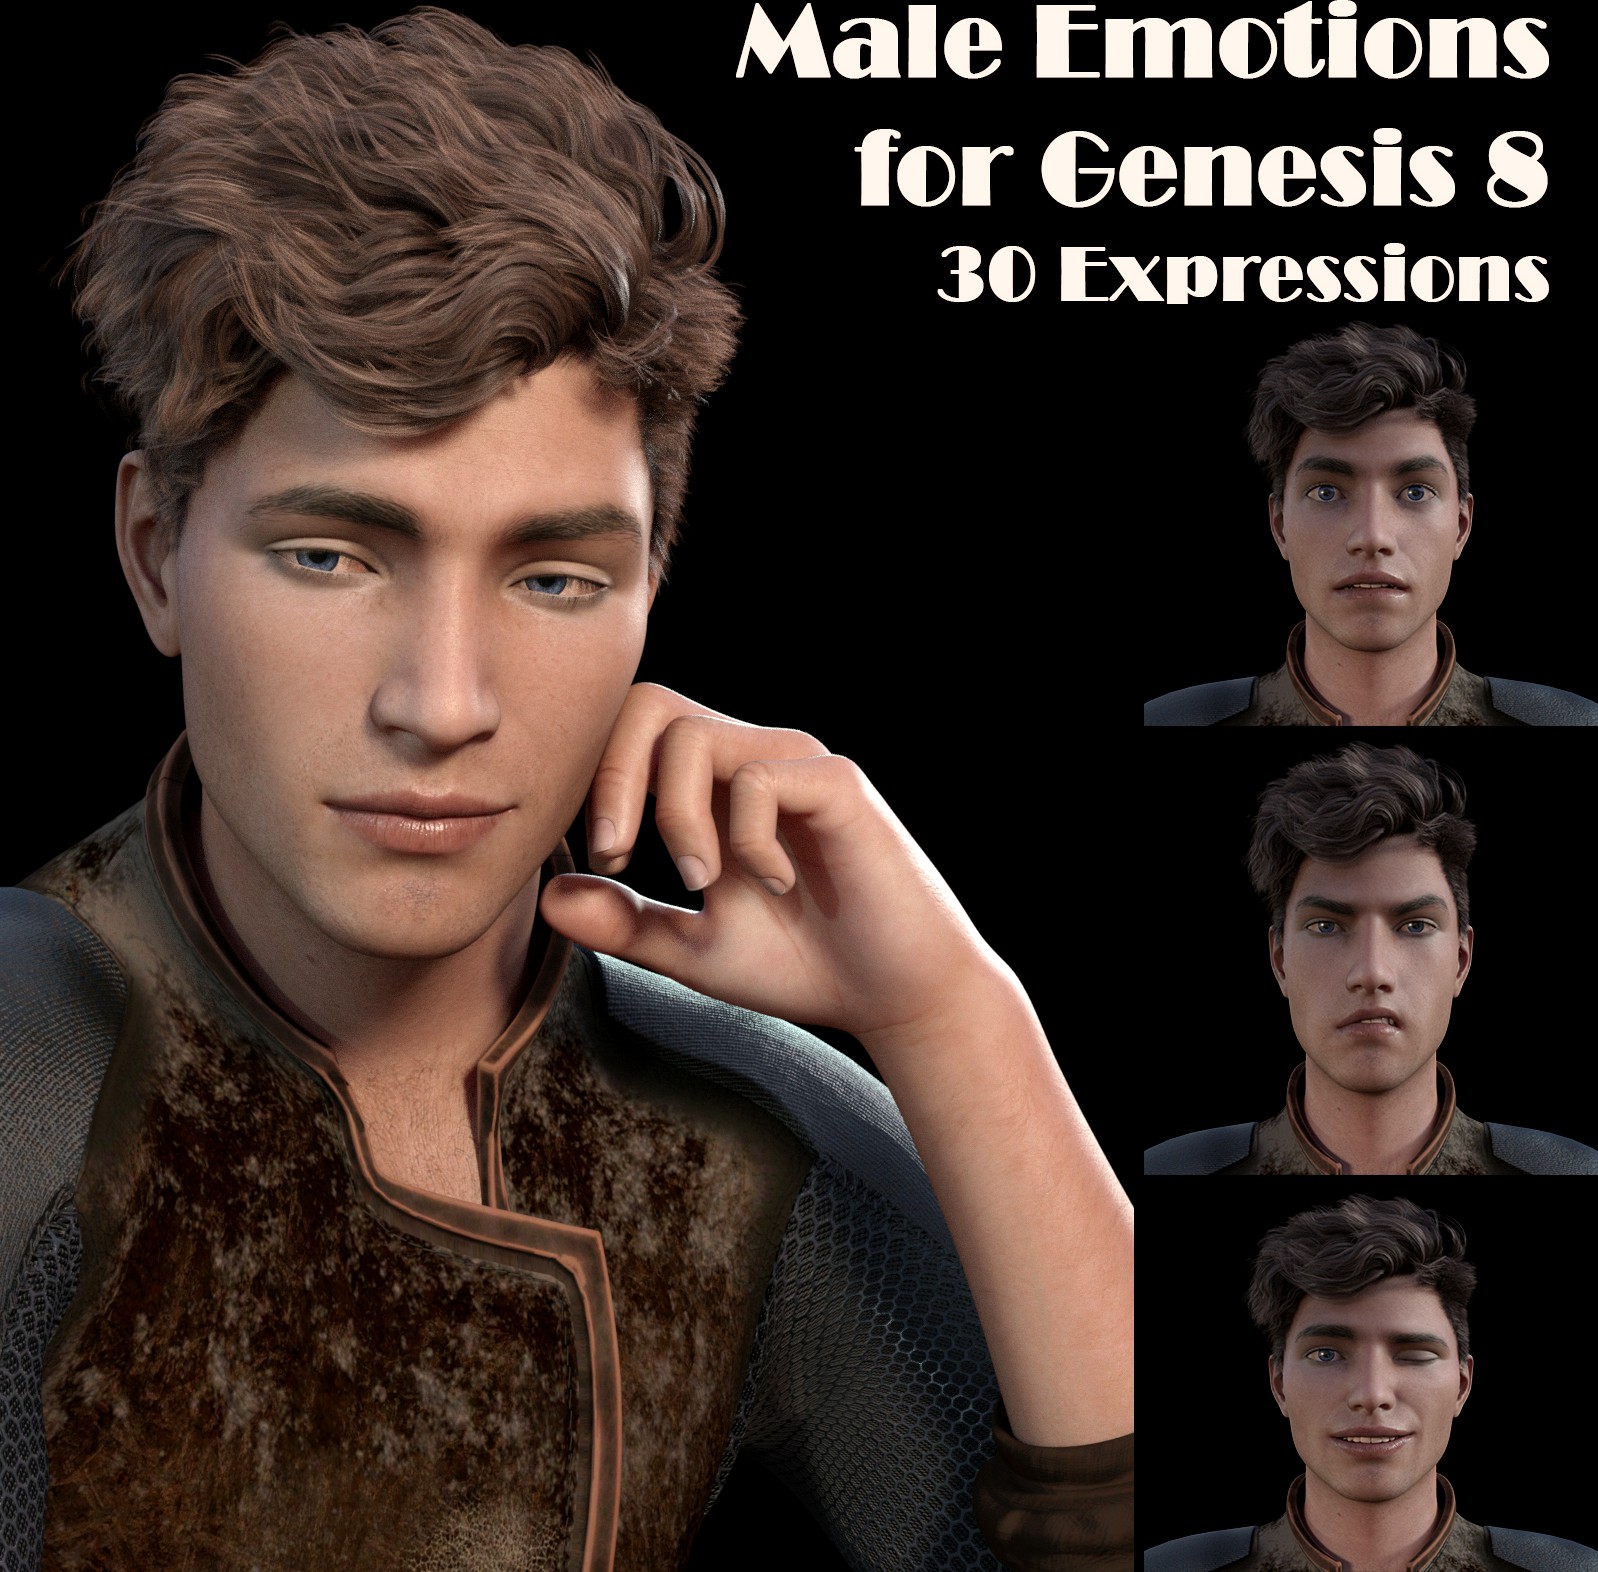 Male Emotions for Genesis 8